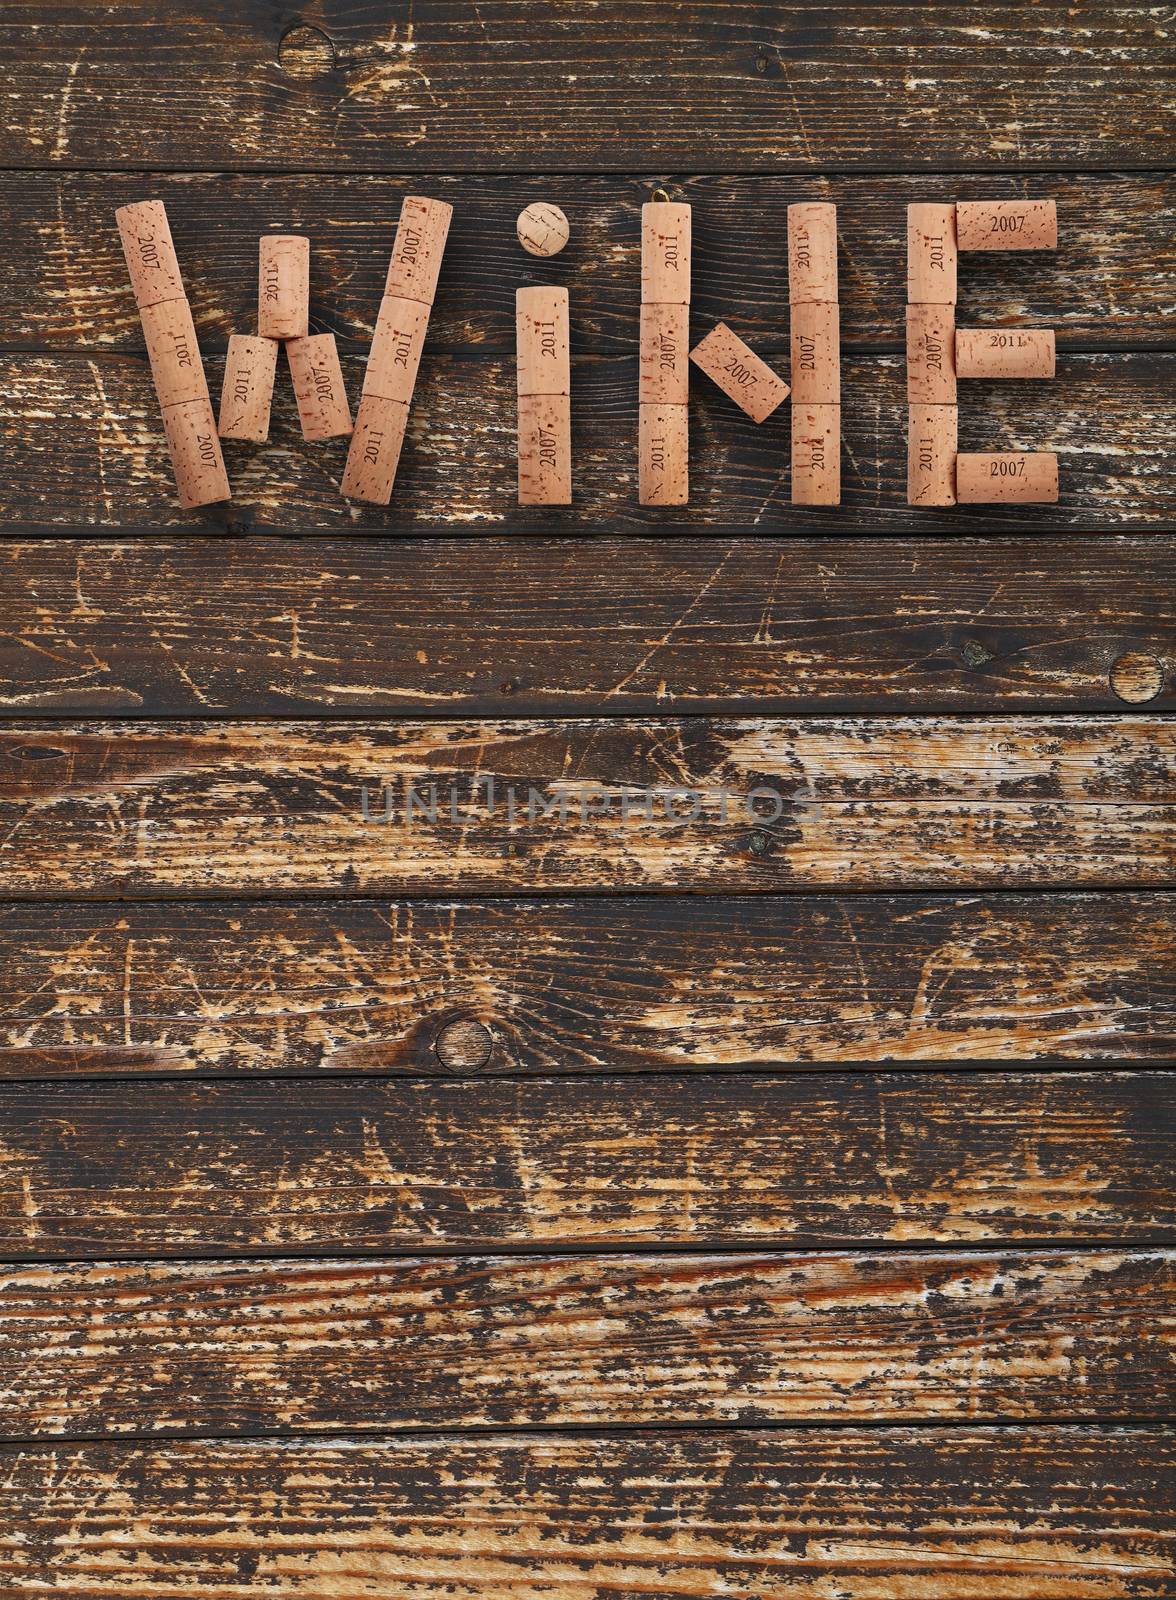 Word WINE shaped by natural wooden wine bottle corks of different vintage years over background of dark old wooden planks